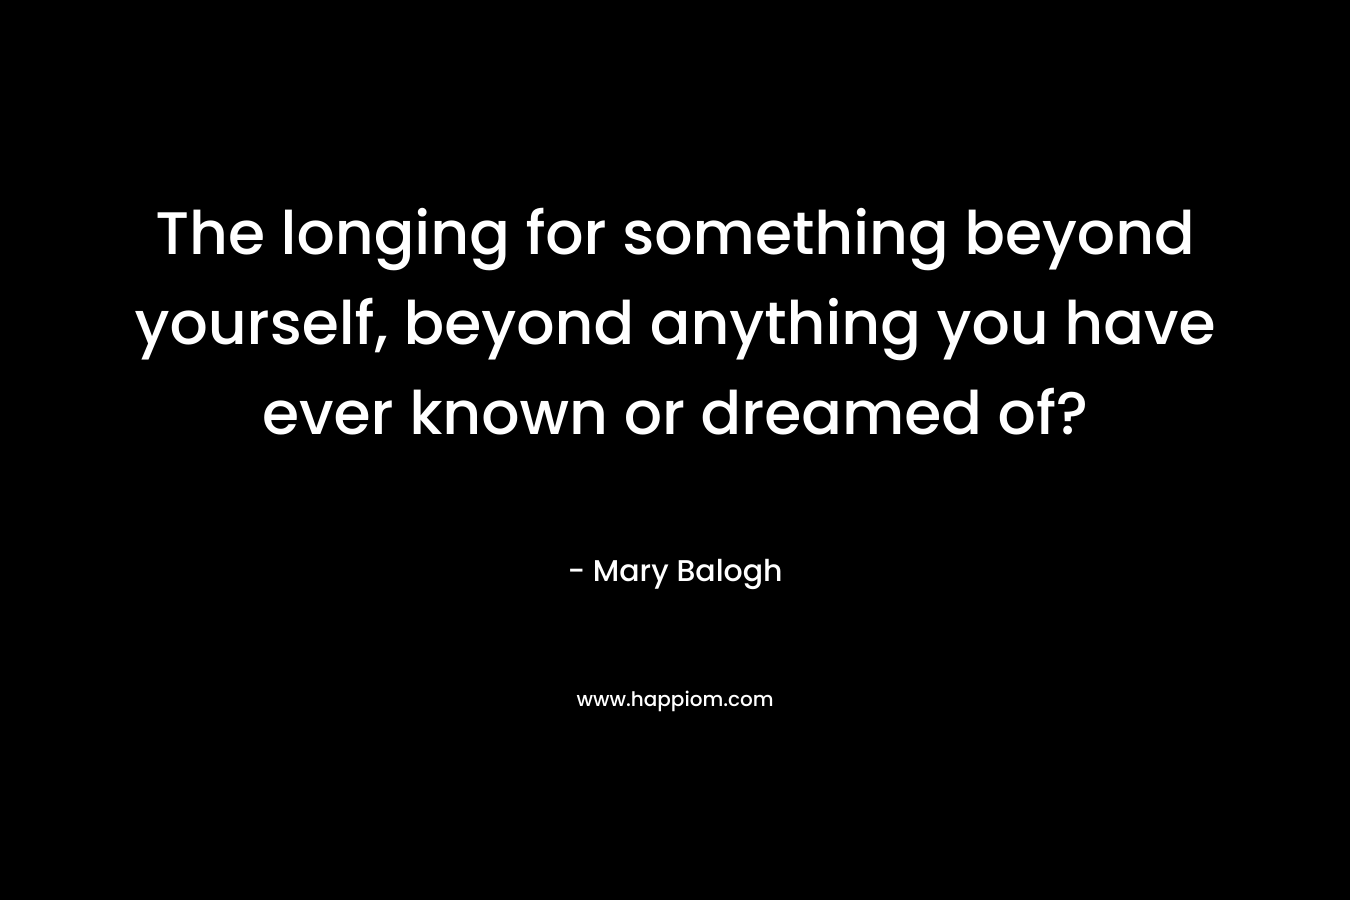 The longing for something beyond yourself, beyond anything you have ever known or dreamed of?